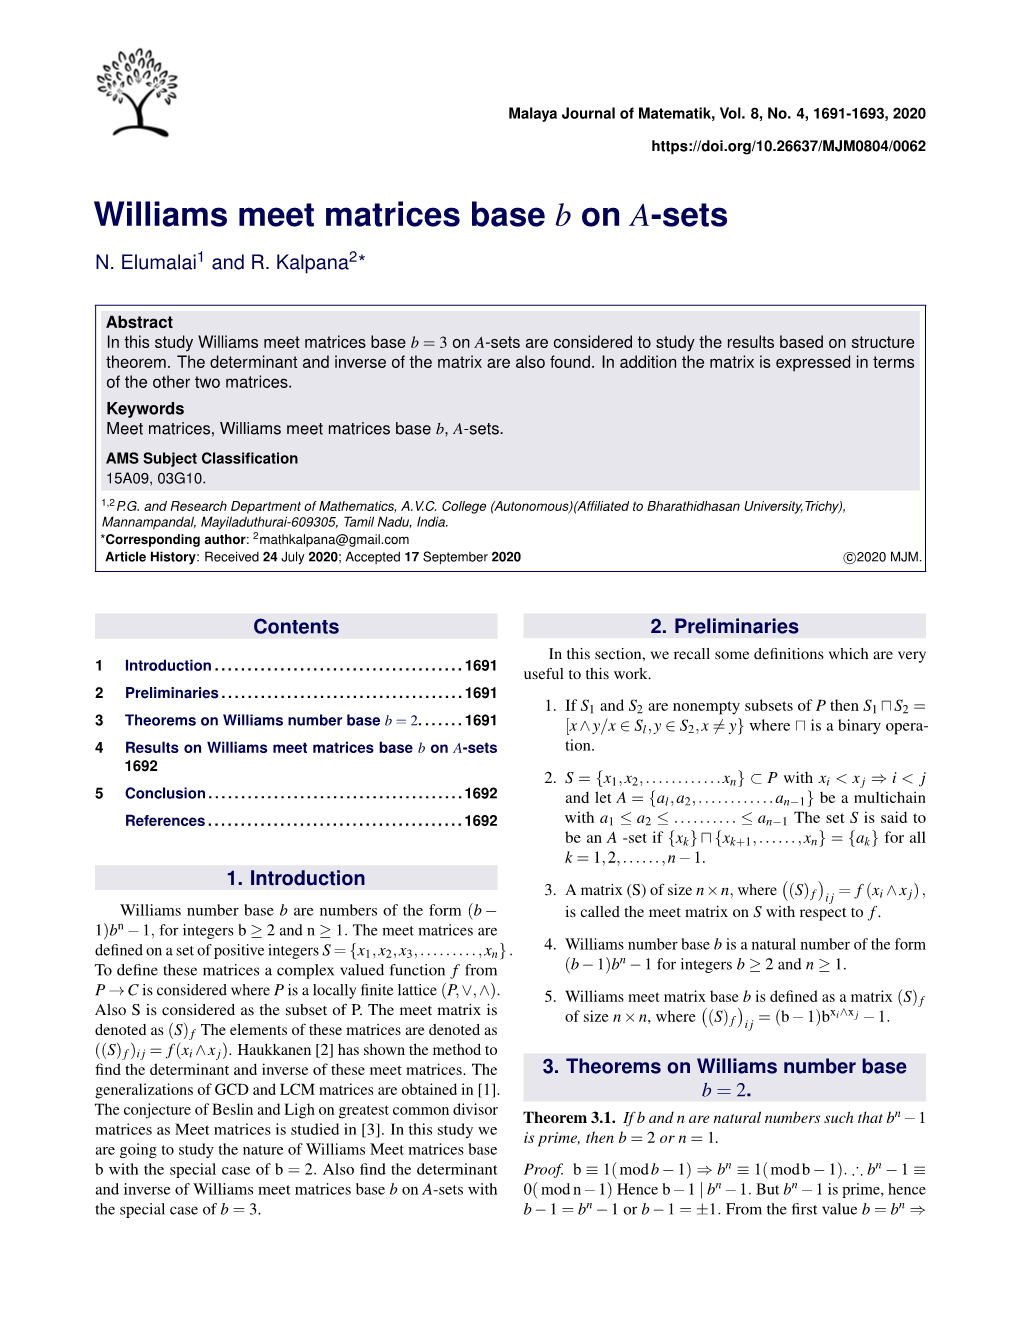 Williams Meet Matrices Base B on A-Sets